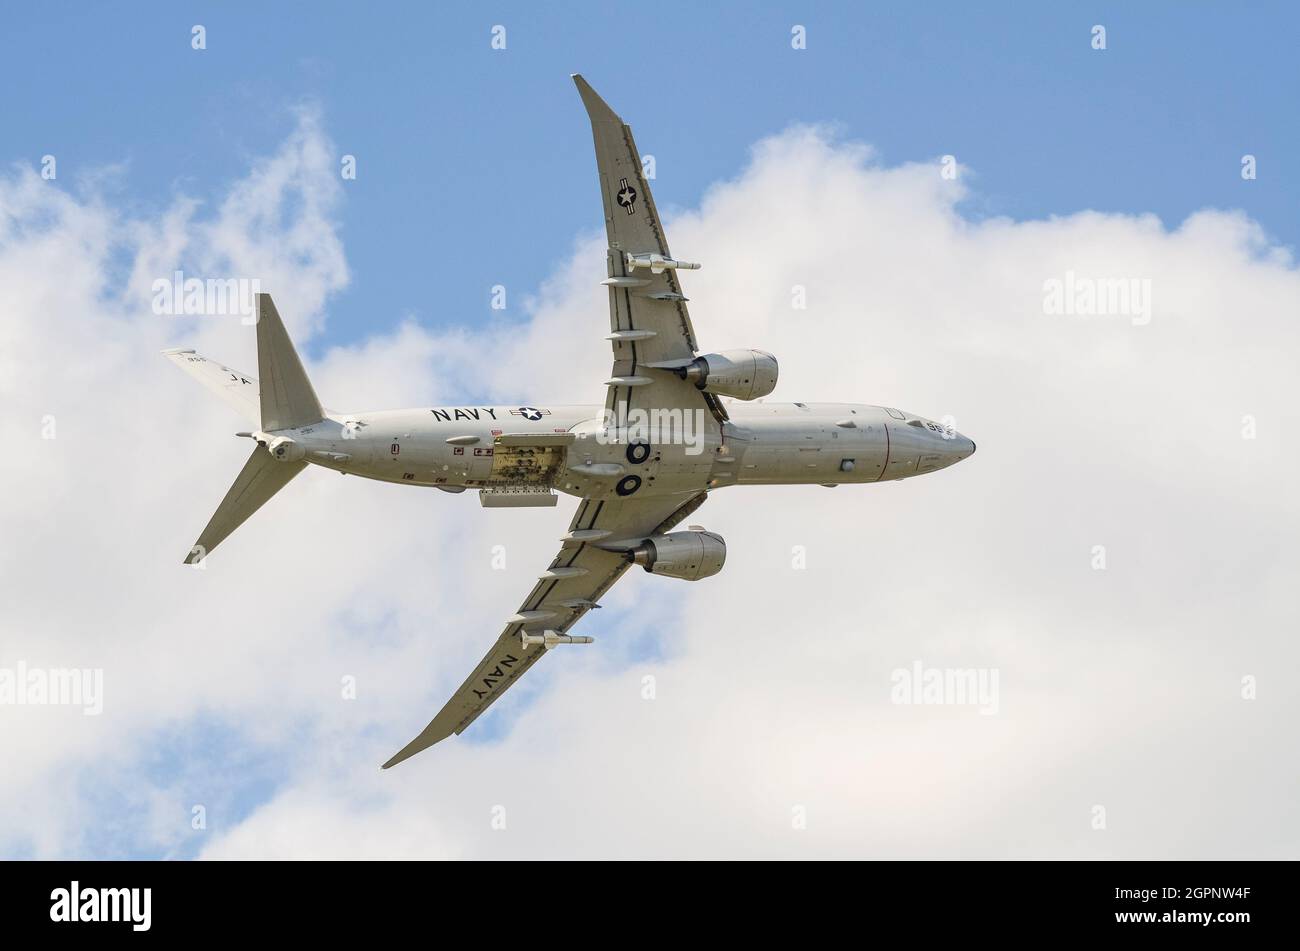 US Navy Boeing P-8A Poseidon military anti ship and anti submarine jet aircraft developed for the United States Navy, flying at Farnborough Airshow Stock Photo